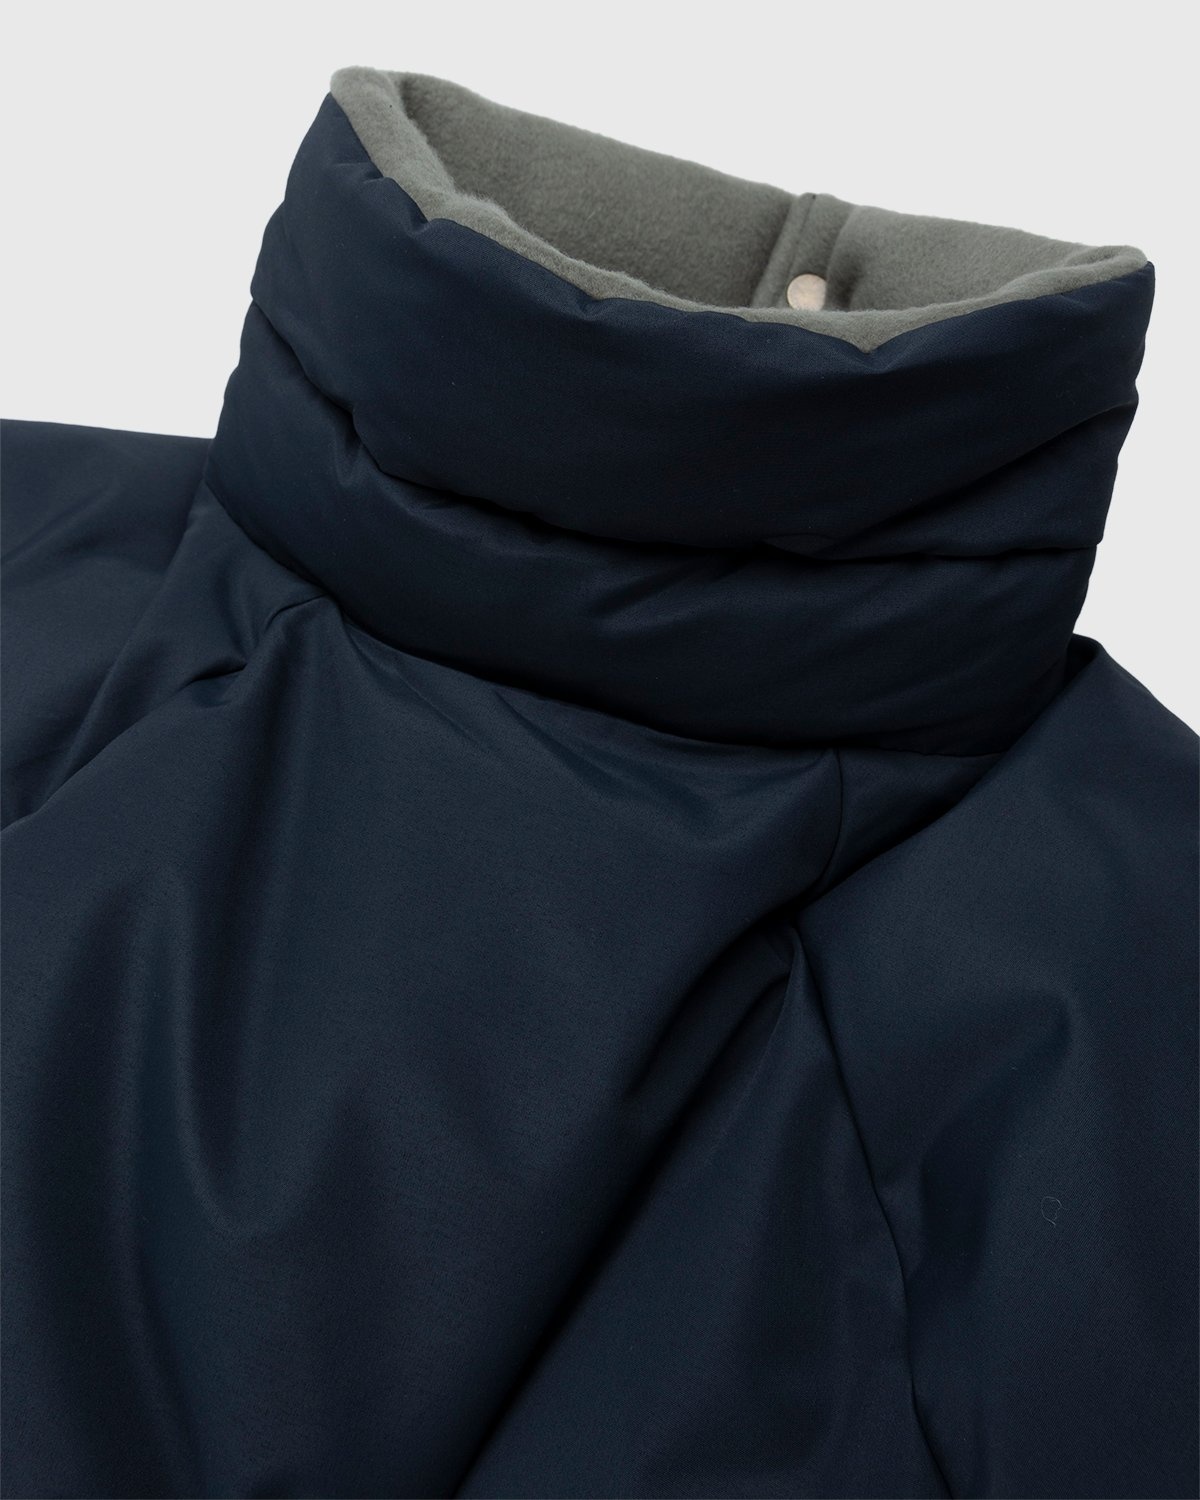 Acne Studios – Down Puffer Jacket Charcoal Grey - Outerwear - Grey - Image 5